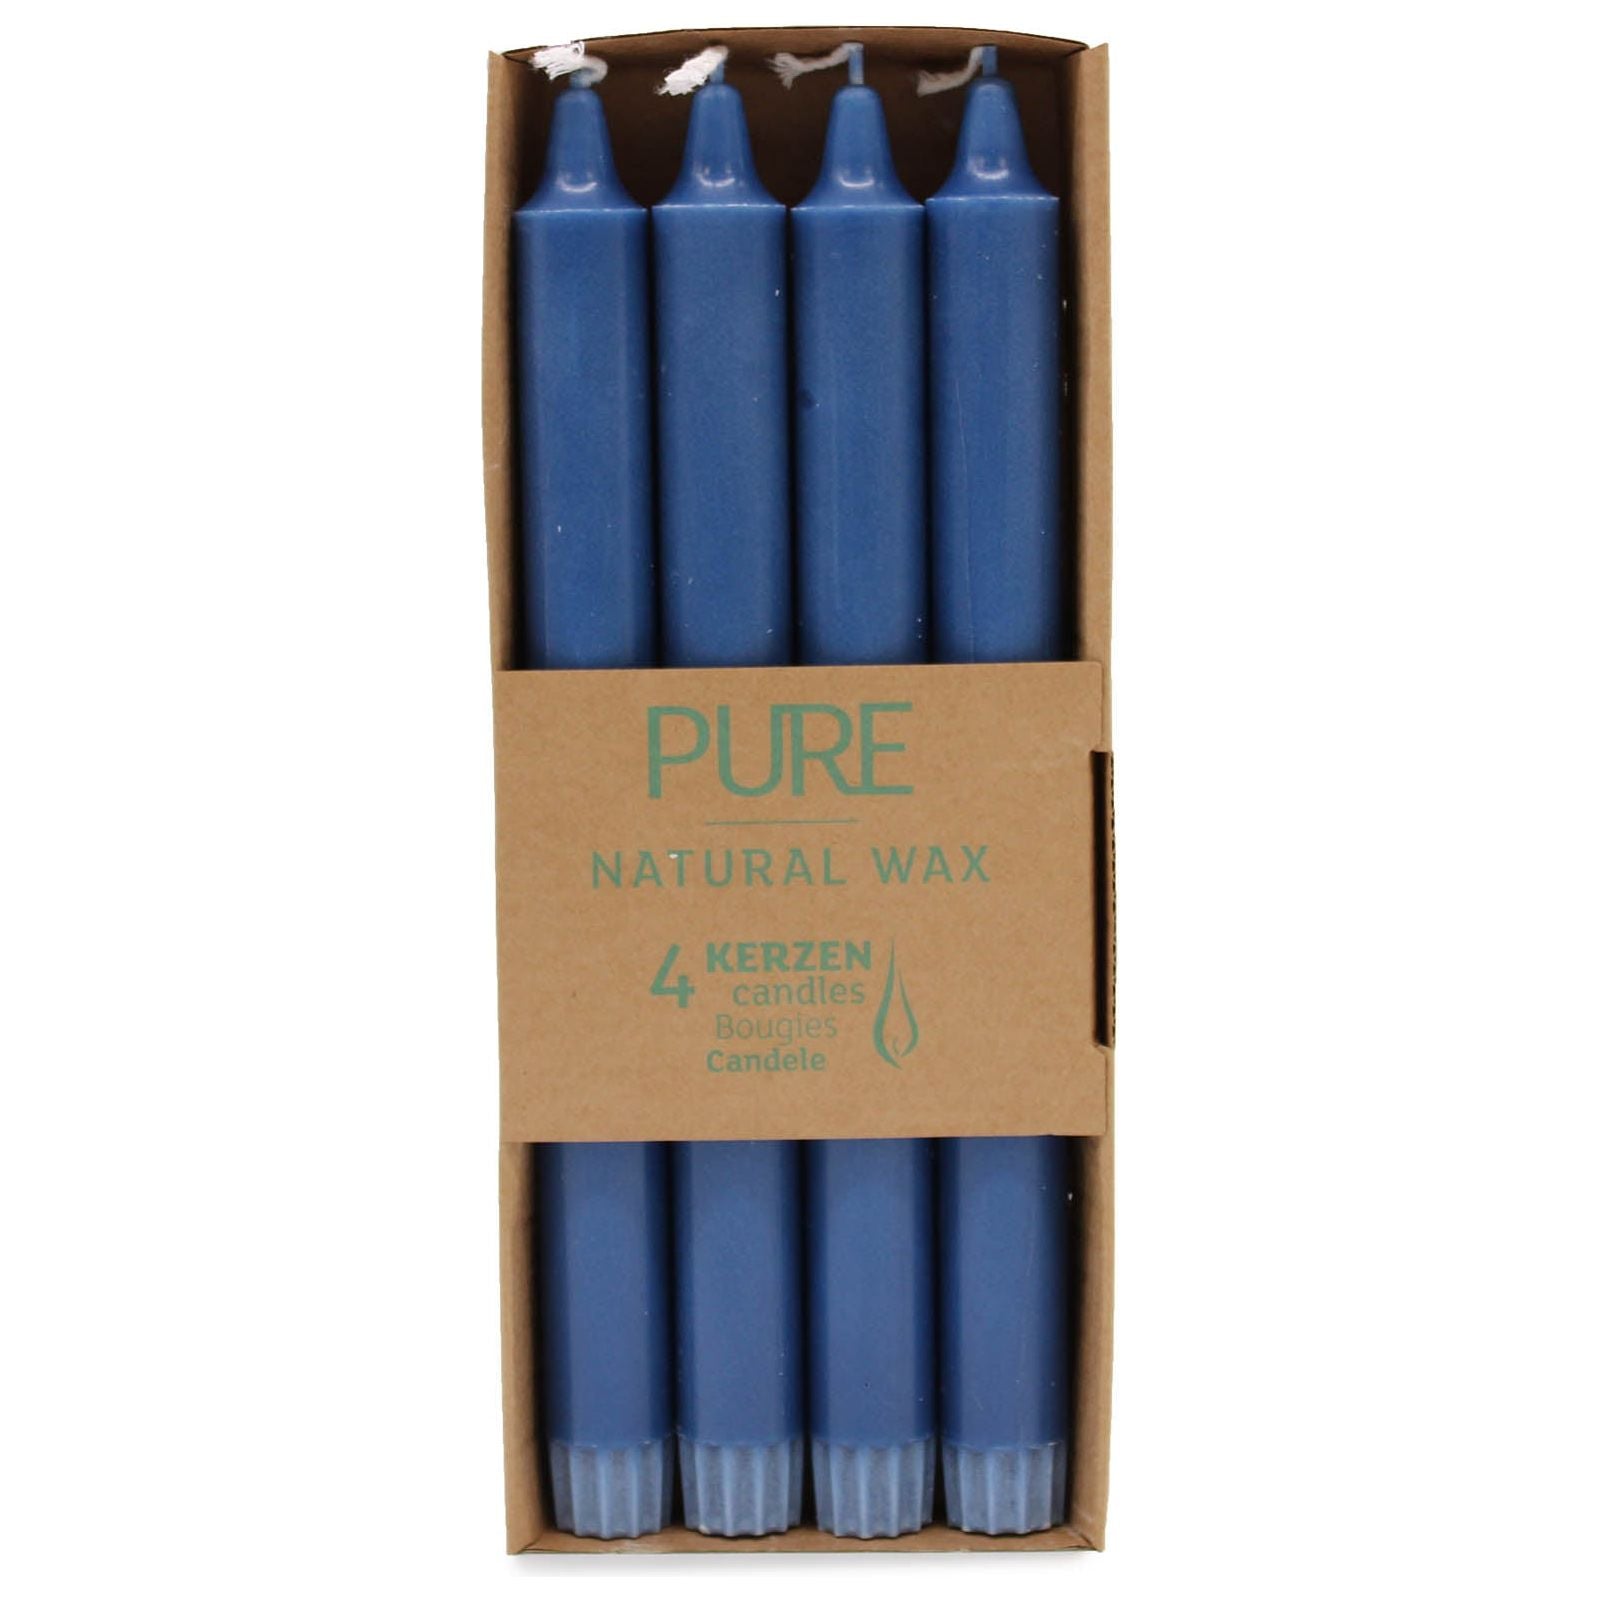 4 x Pure Natural Wax Dinner Candle 25x2.3 - Blue - Ashton and Finch